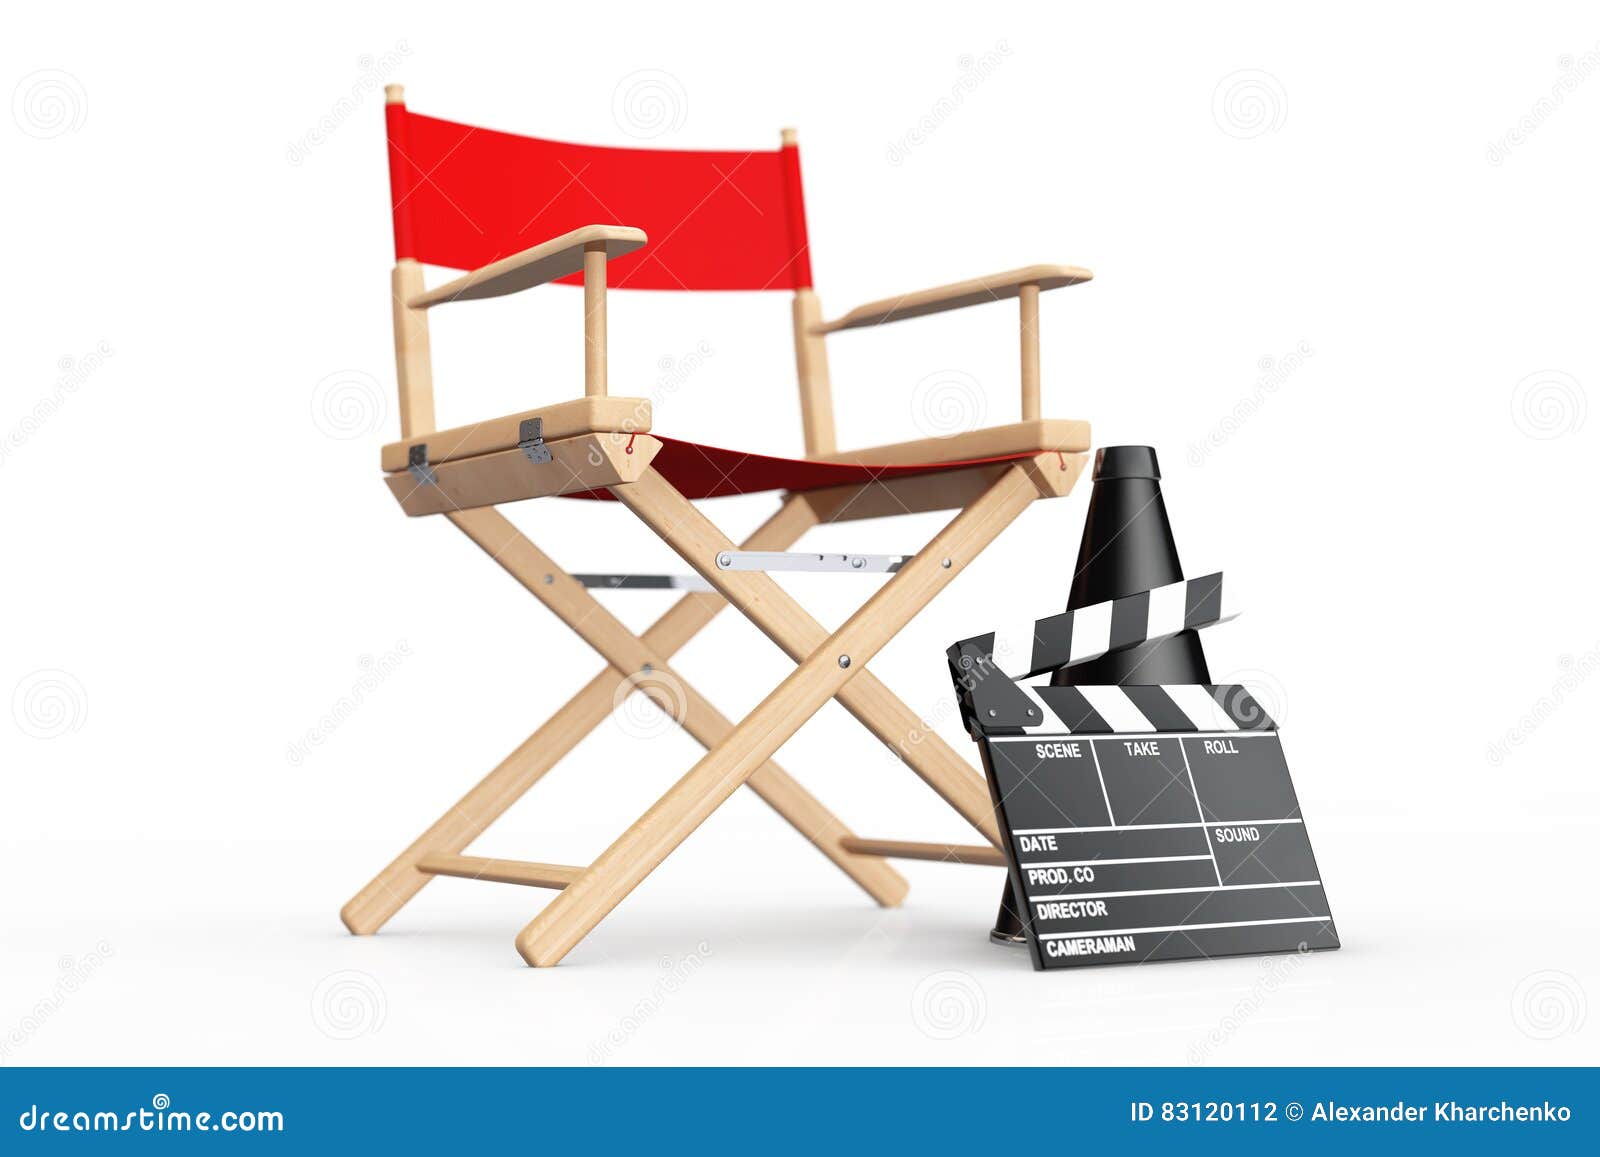 cinema industry concept. red director chair, movie clapper and m